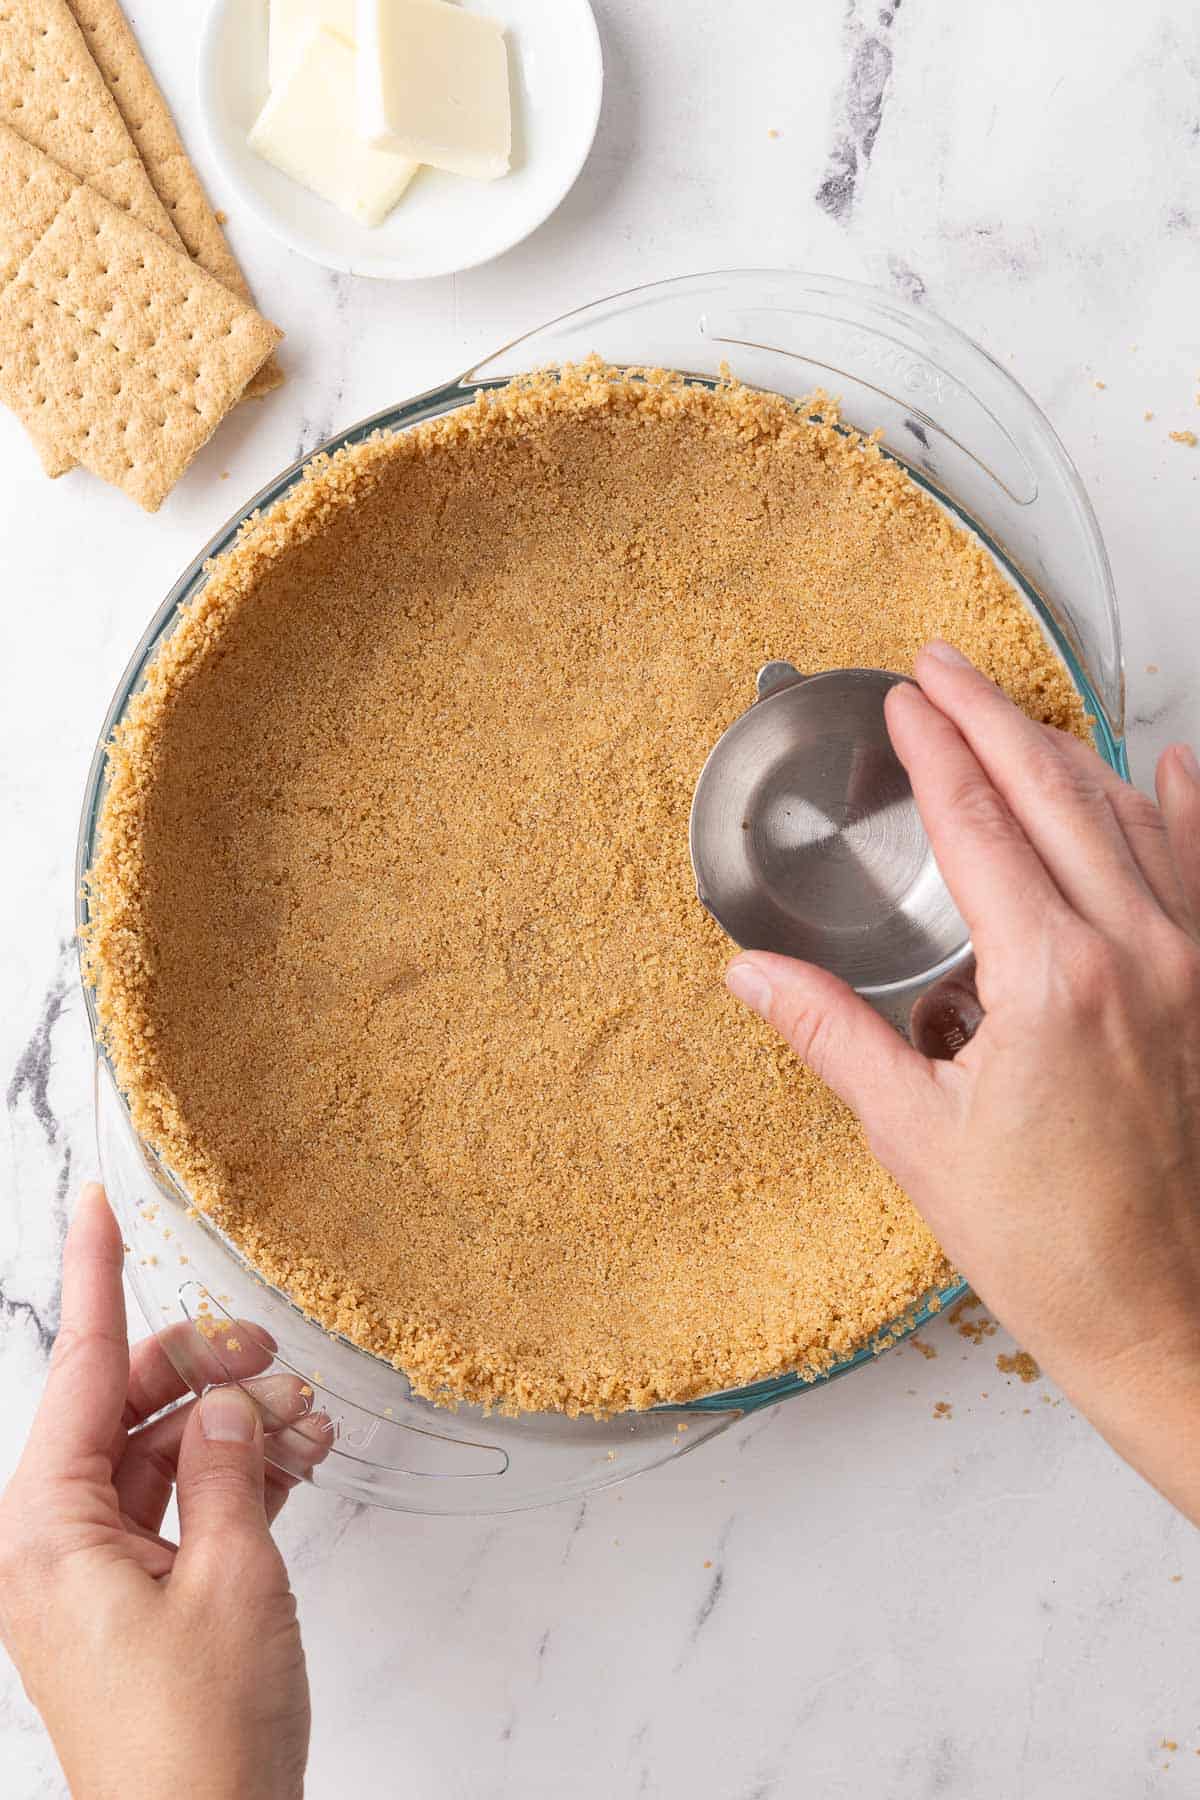 Tutorial showing how to make a graham cracker crust in a glass pie dish by pressing the crumbs down with a measuring cup.